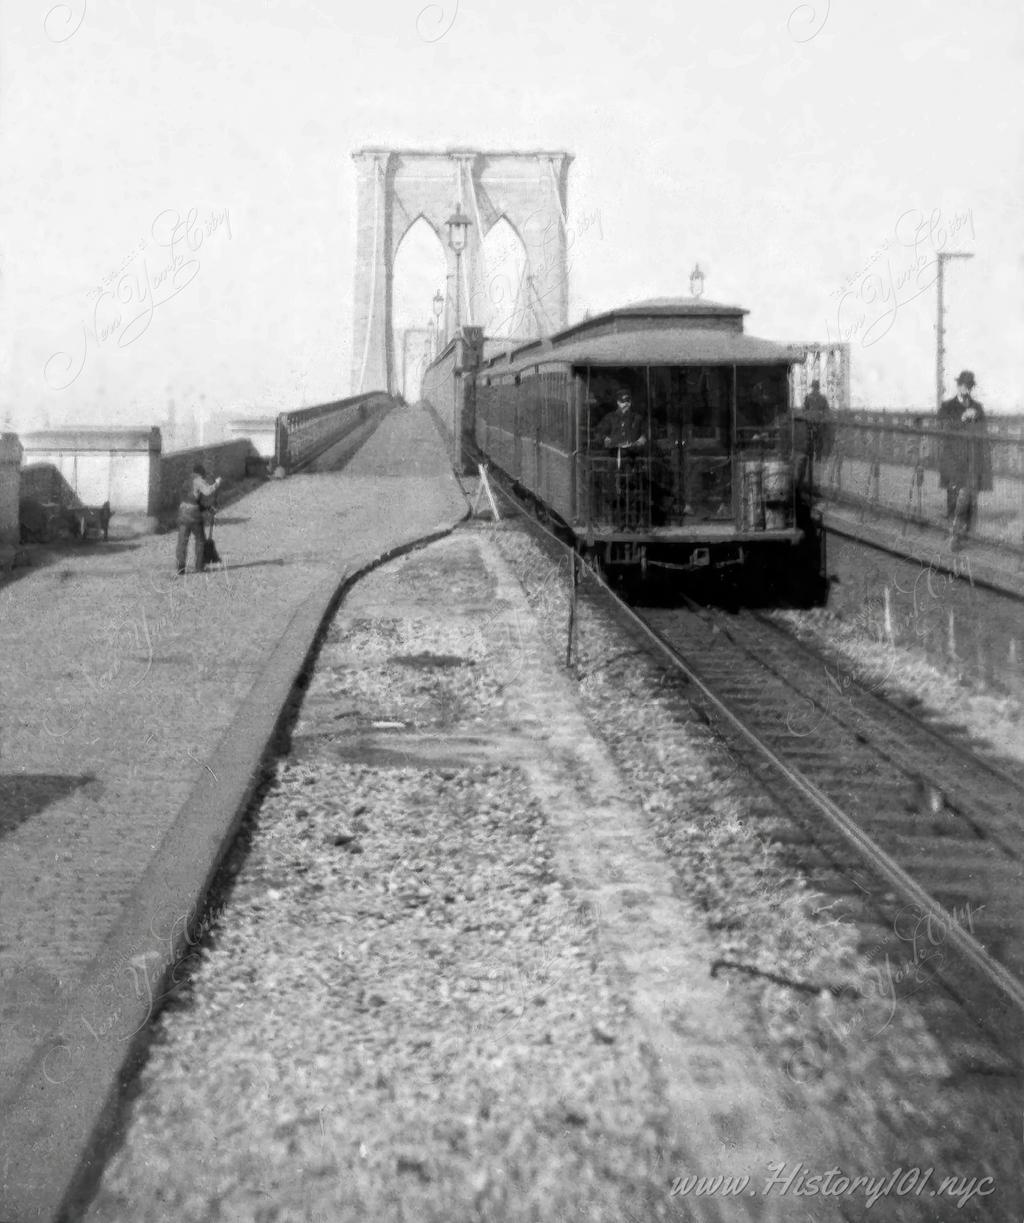 Photograph of a the trolley tracks on the Brooklyn Bridge. A city worker is seen cleaning the platform on the left while commuters are seen walking on the right.